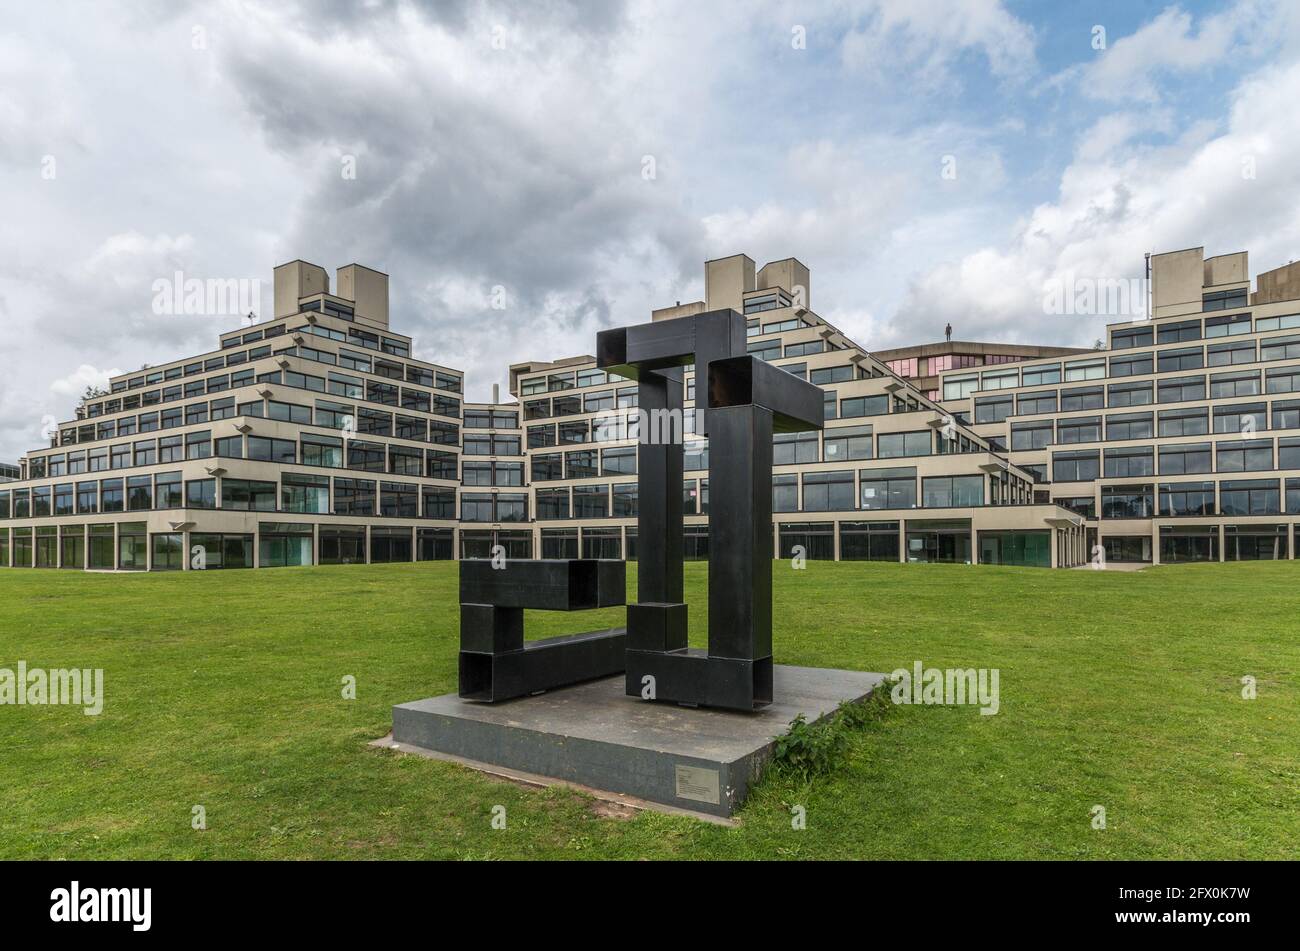 Student accommodation known as Ziggurats, on the campus of the University of East Anglia, Norwich, UK; Proximity sculpture, by Ian Tyson, 2006 Stock Photo